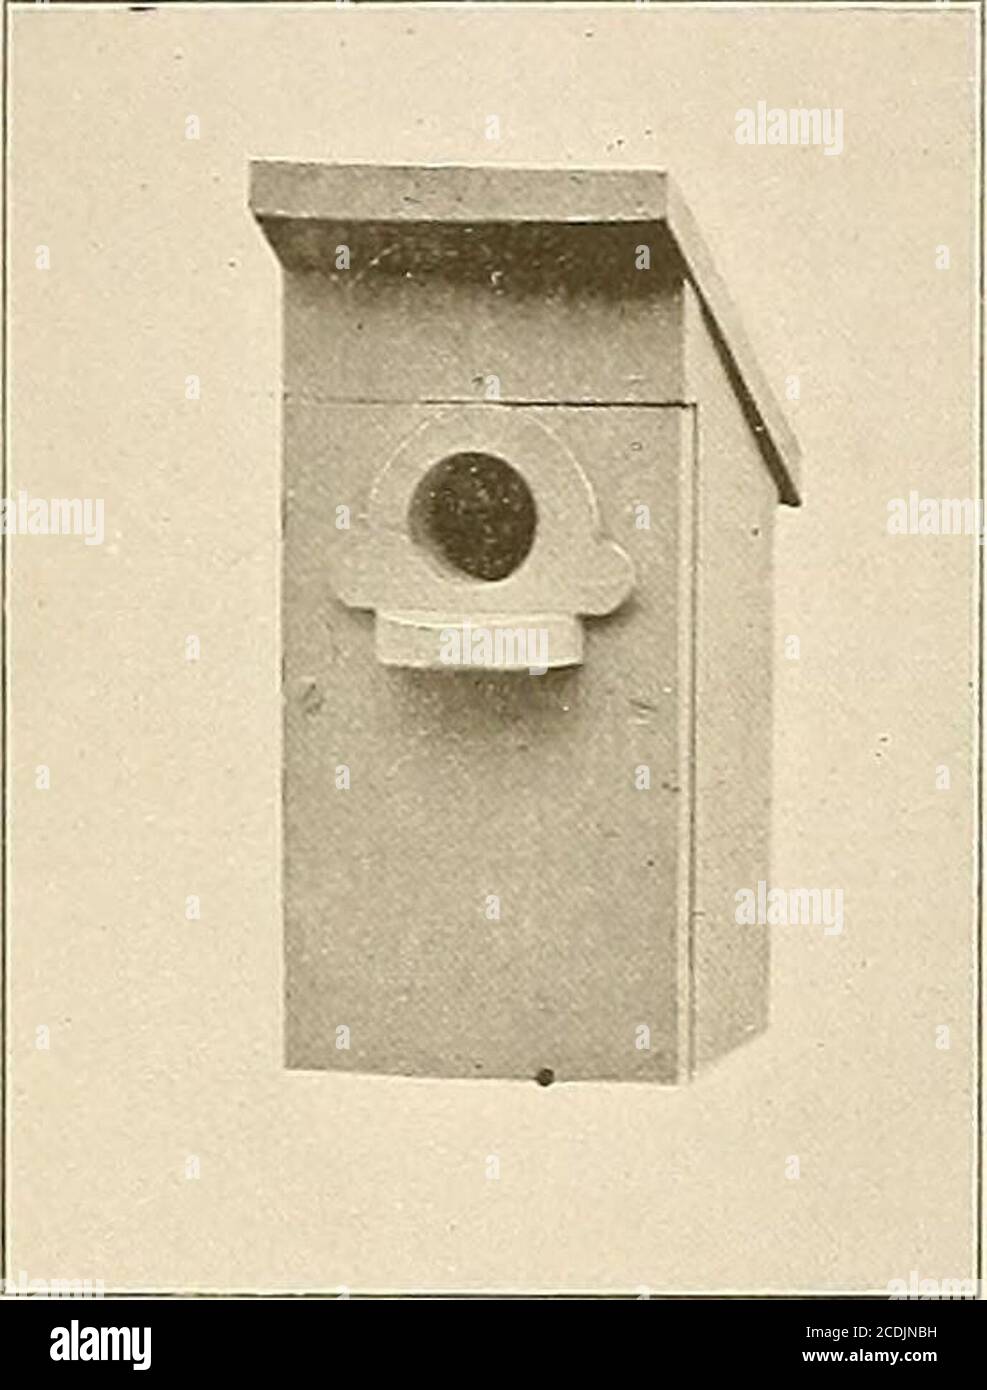 . Seventh annual bird-house booklet. . offer to the public, the fruits of our knowledge in products thenearest perfection possible. All nest-boxes are $1.00 each, F. 0. B. Waynesburg, Pa. (See pages 21 and 22). Small orders for from one to three of these nest-boxes can be sent by parcels post, whenamount of postage is included with order. (See our Parcels Post Feature p. 23). One dozennest-boxes will go by freight for the minimum freight charge on one hundred pounds. Ex-pressage to any point is about two and one-half times the freight rate. One dozen nest-boxes, assorted (your own selection) $ Stock Photo